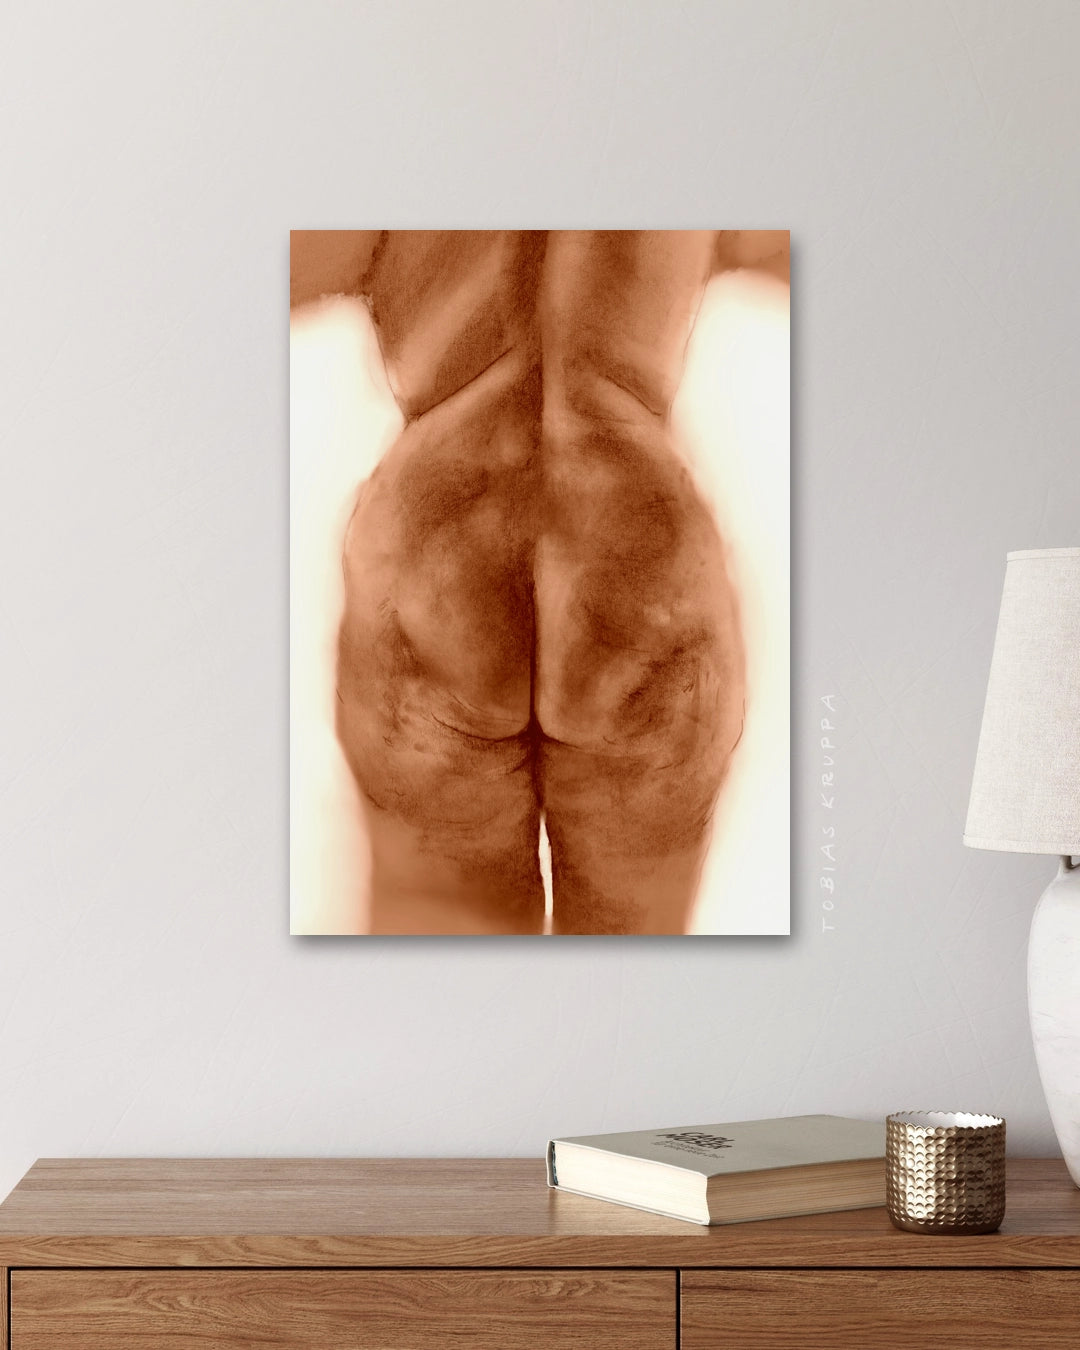 Fine art prints of personalized commissioned artworks depicting female bottoms in a range of sizes and shapes